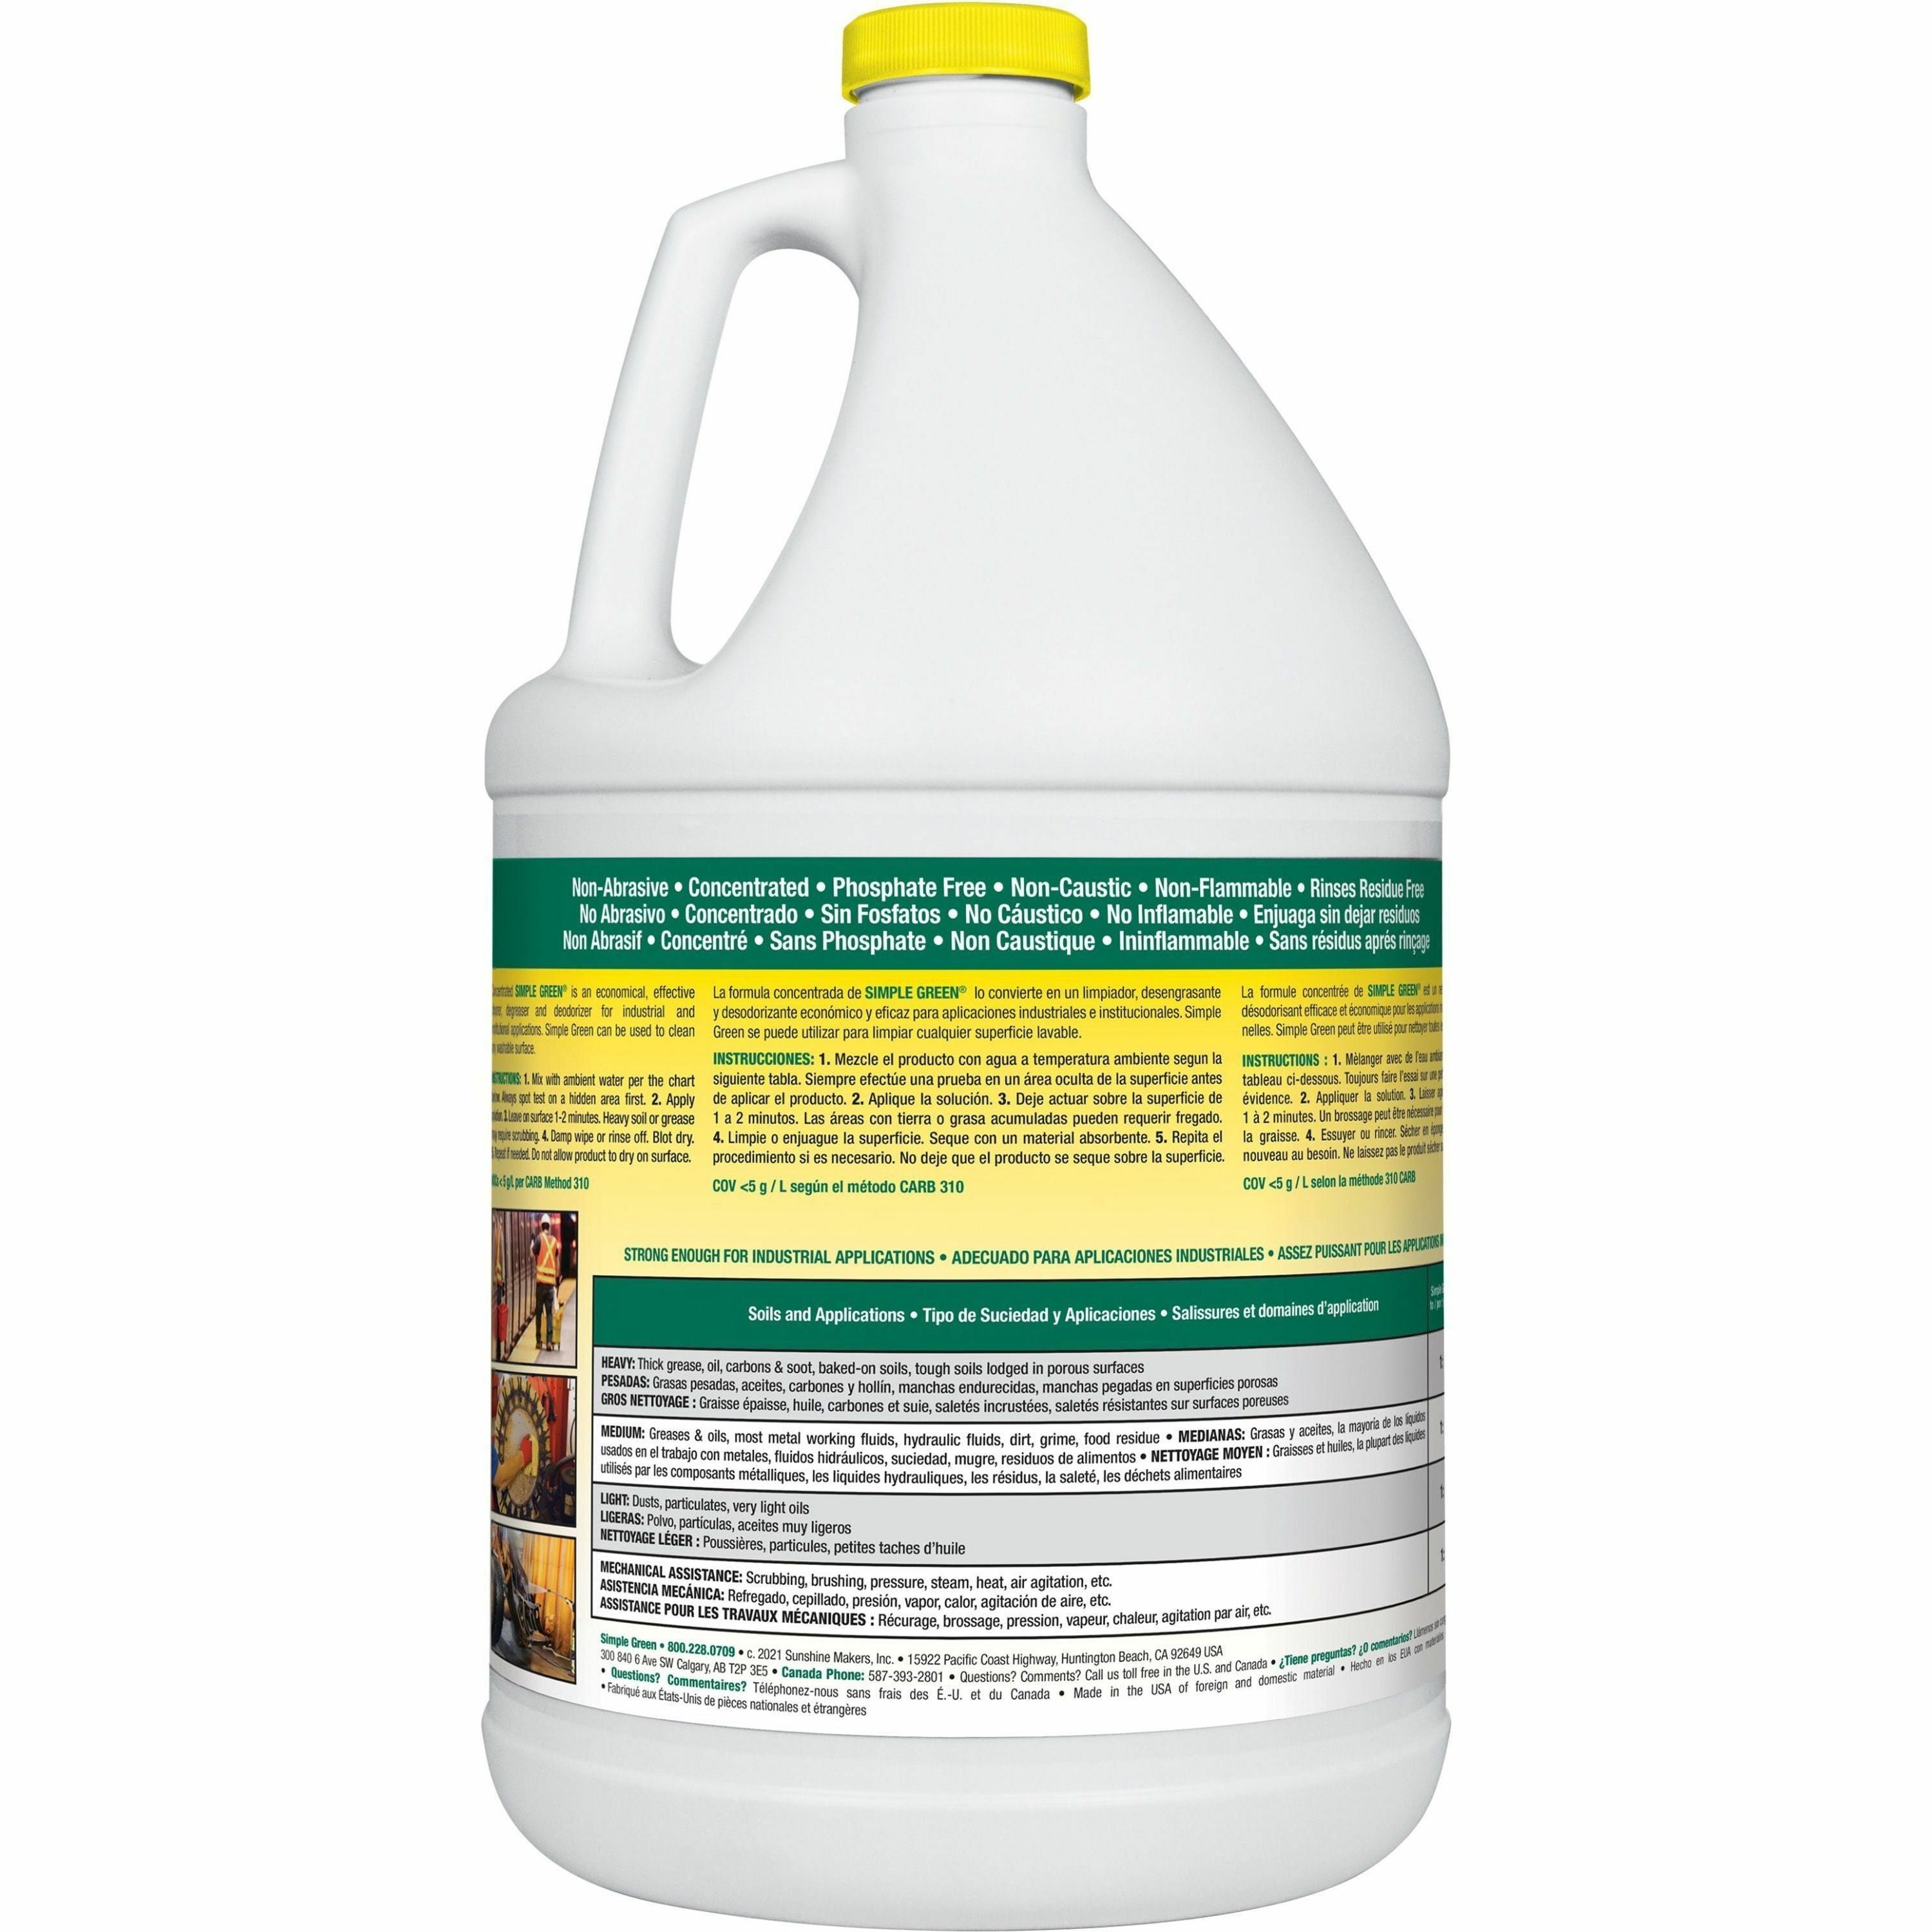 simple-green-industrial-cleaner-degreaser-concentrate-128-fl-oz-4-quart-lemon-scent-6-carton-non-toxic-voc-free-butyl-free-phosphate-free-non-abrasive-non-corrosive-deodorize-non-flammable-lemon_smp14010ct - 2